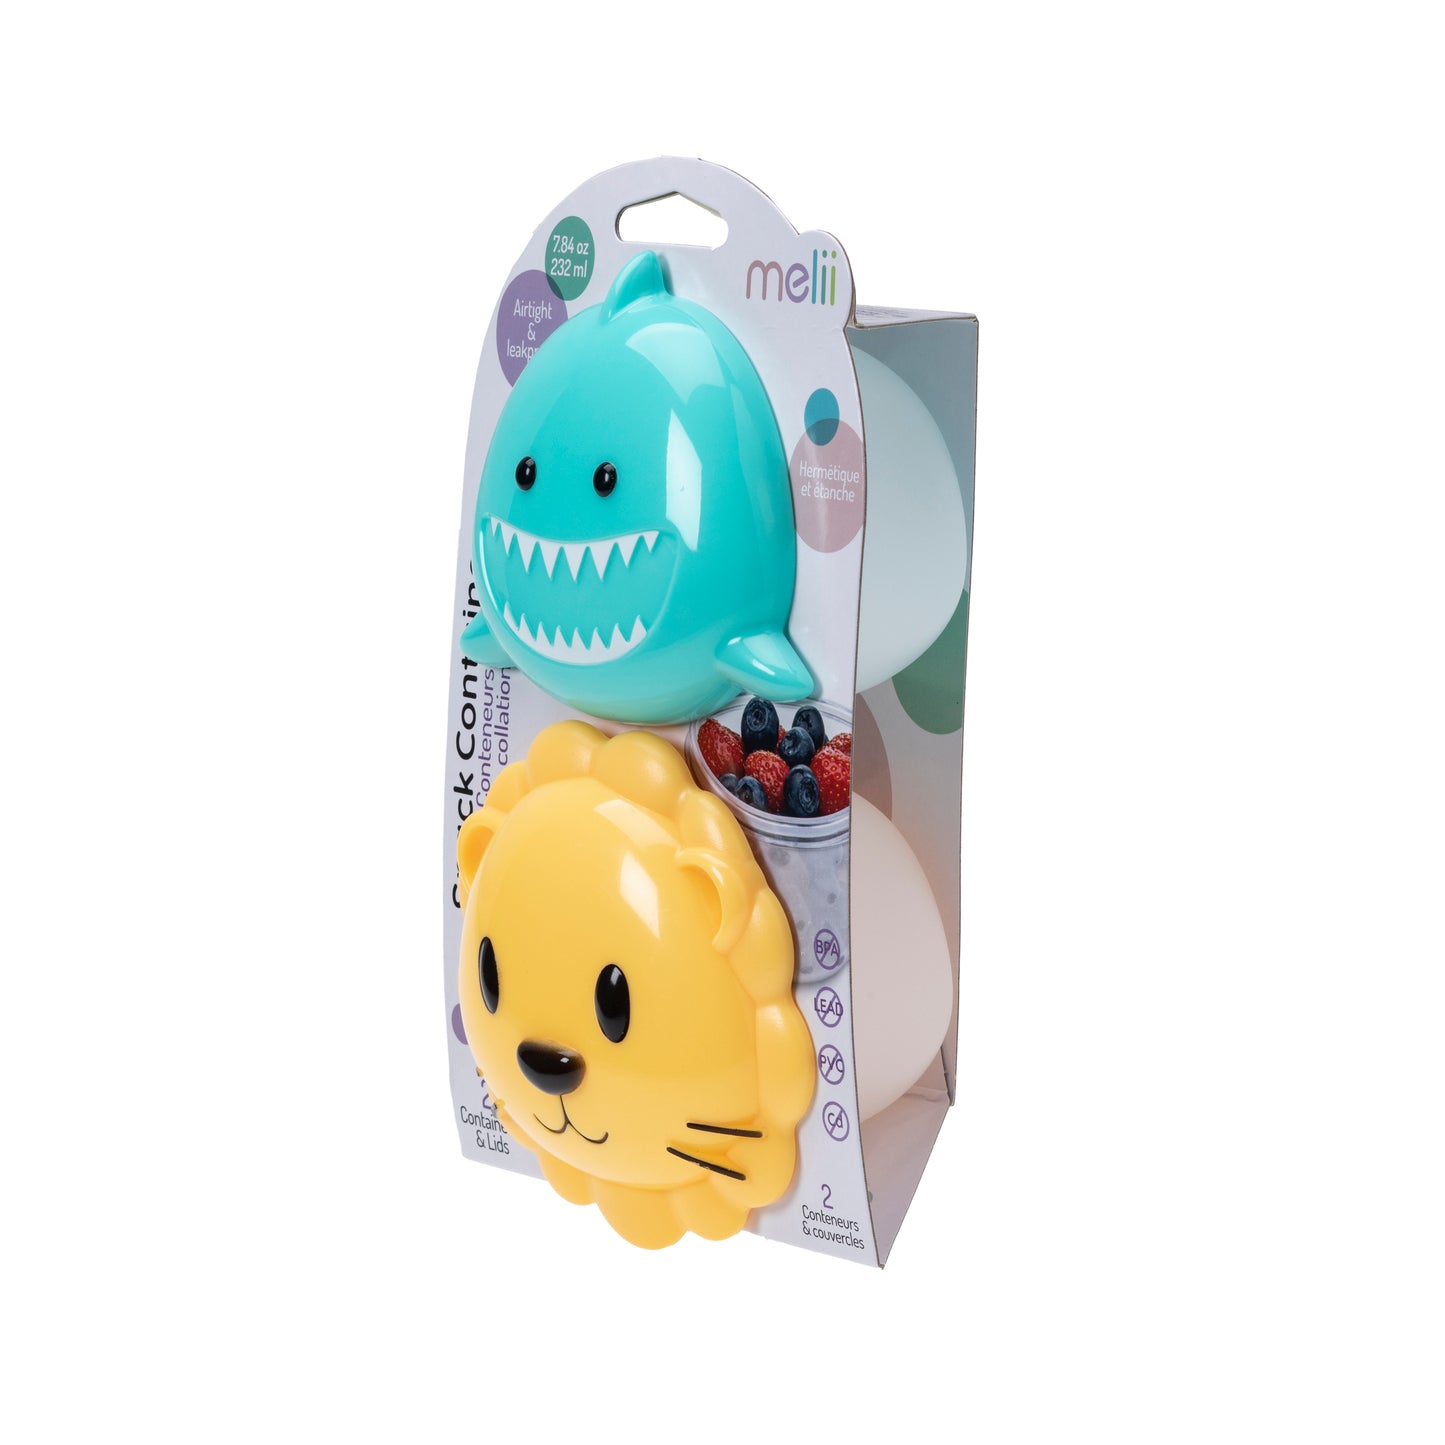 Melii Shark & Lion Snack Containers for Kids - Adorable Airtight, Leakproof Kids Food Storage Set for On-the-Go Joyful Snacking - BPA-Free, Easy to Clean